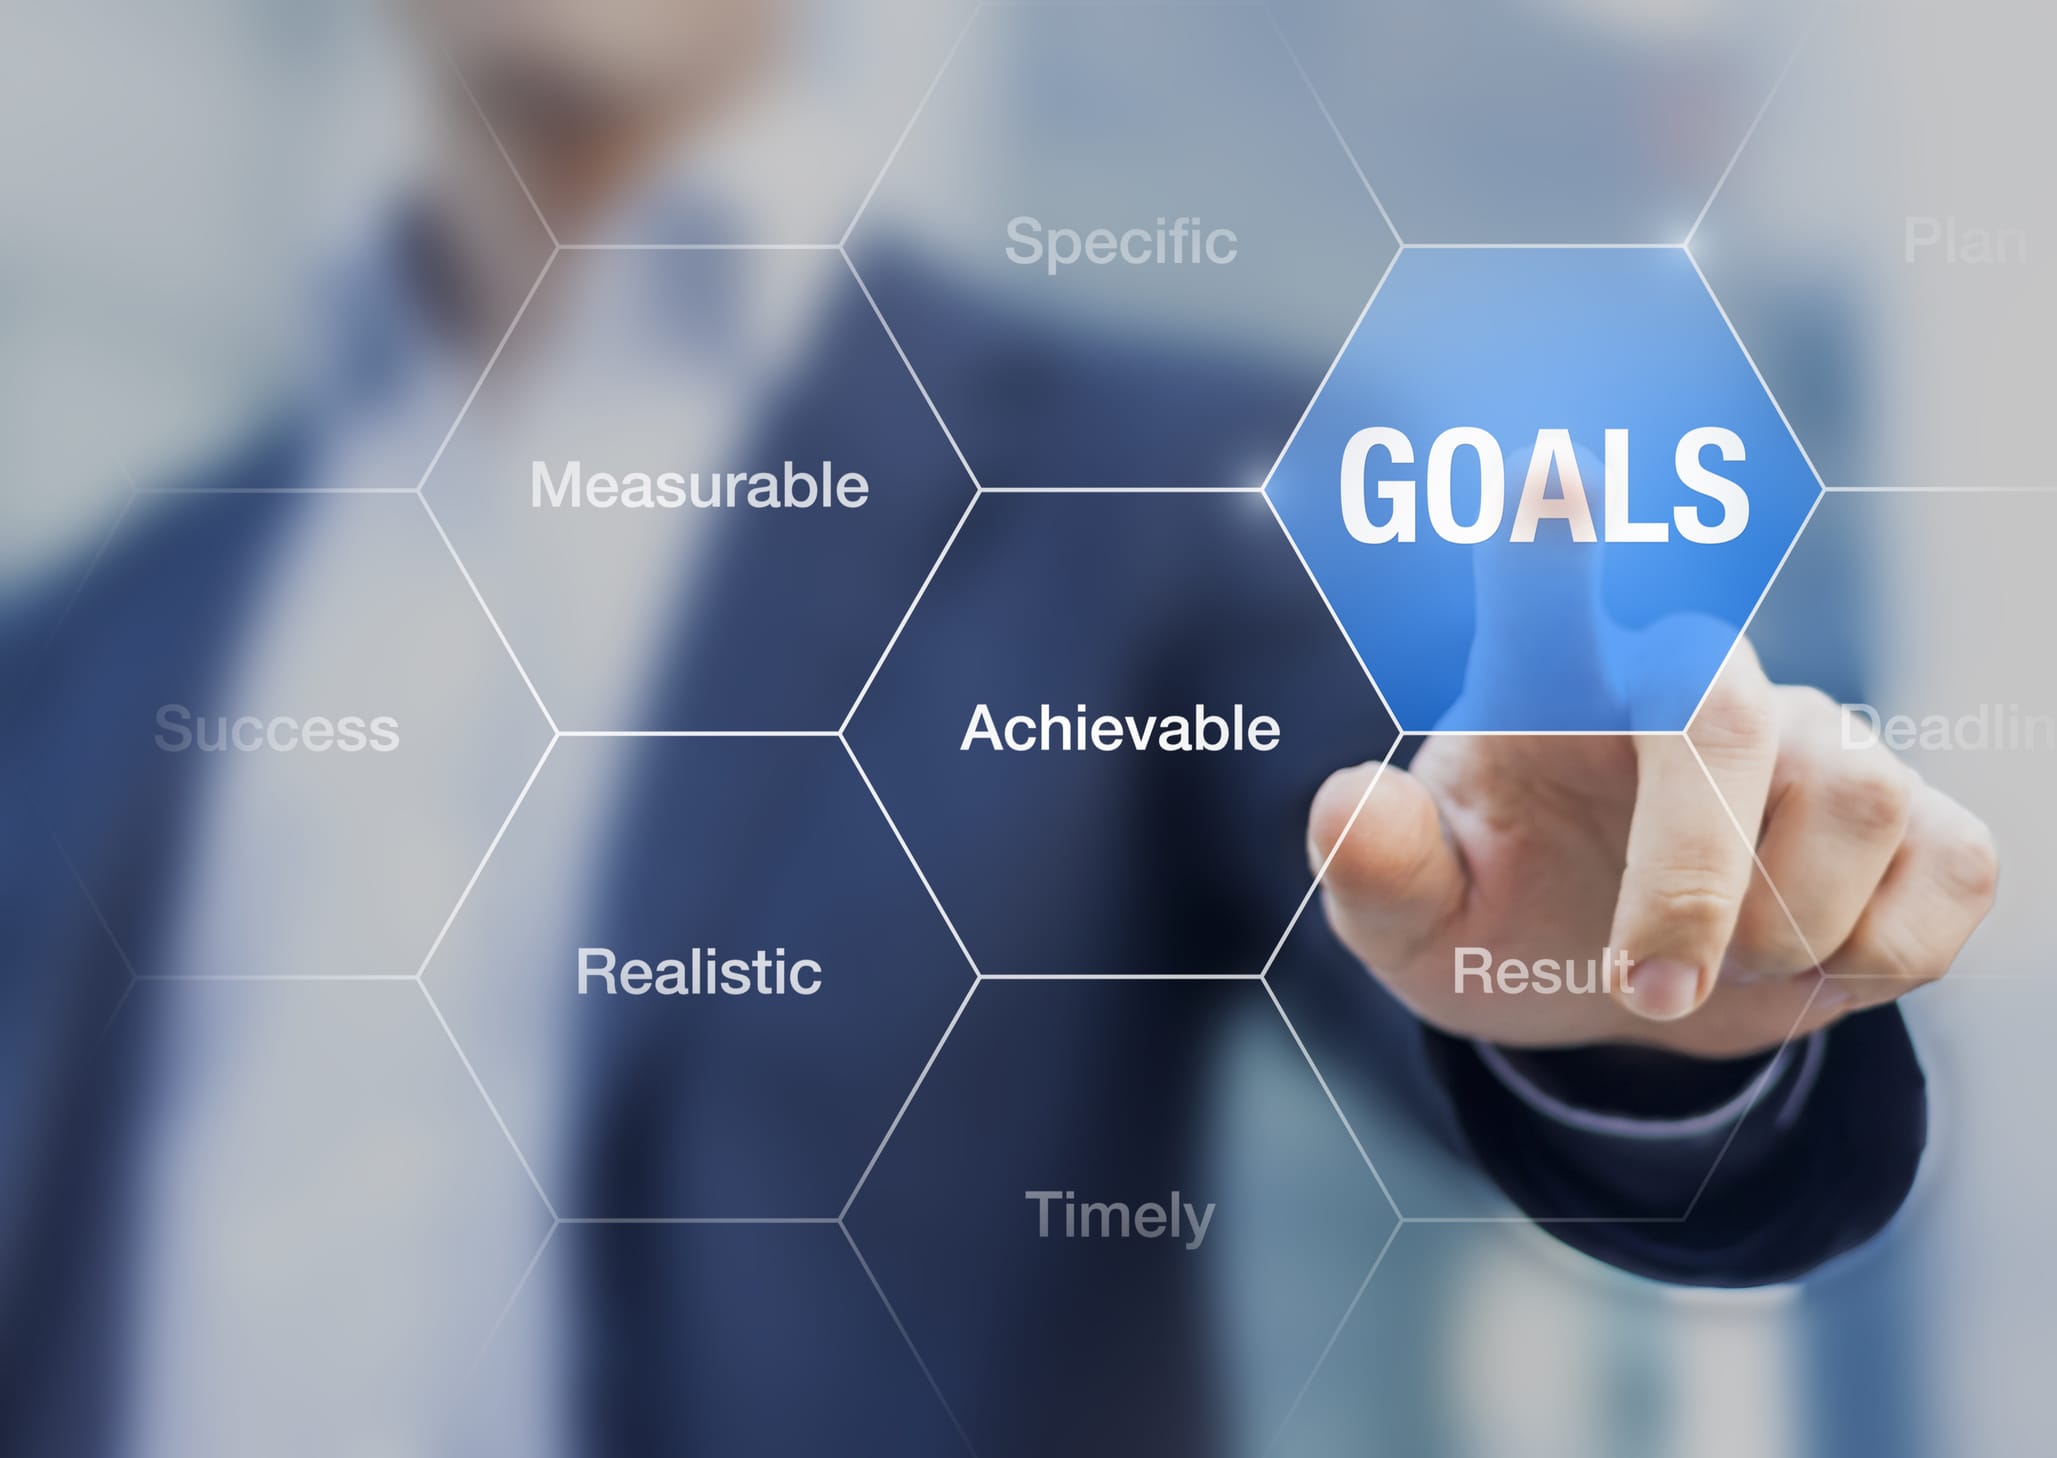 New Year's Resolutions: Goal Setting for 2017 - Sachs Marketing Group